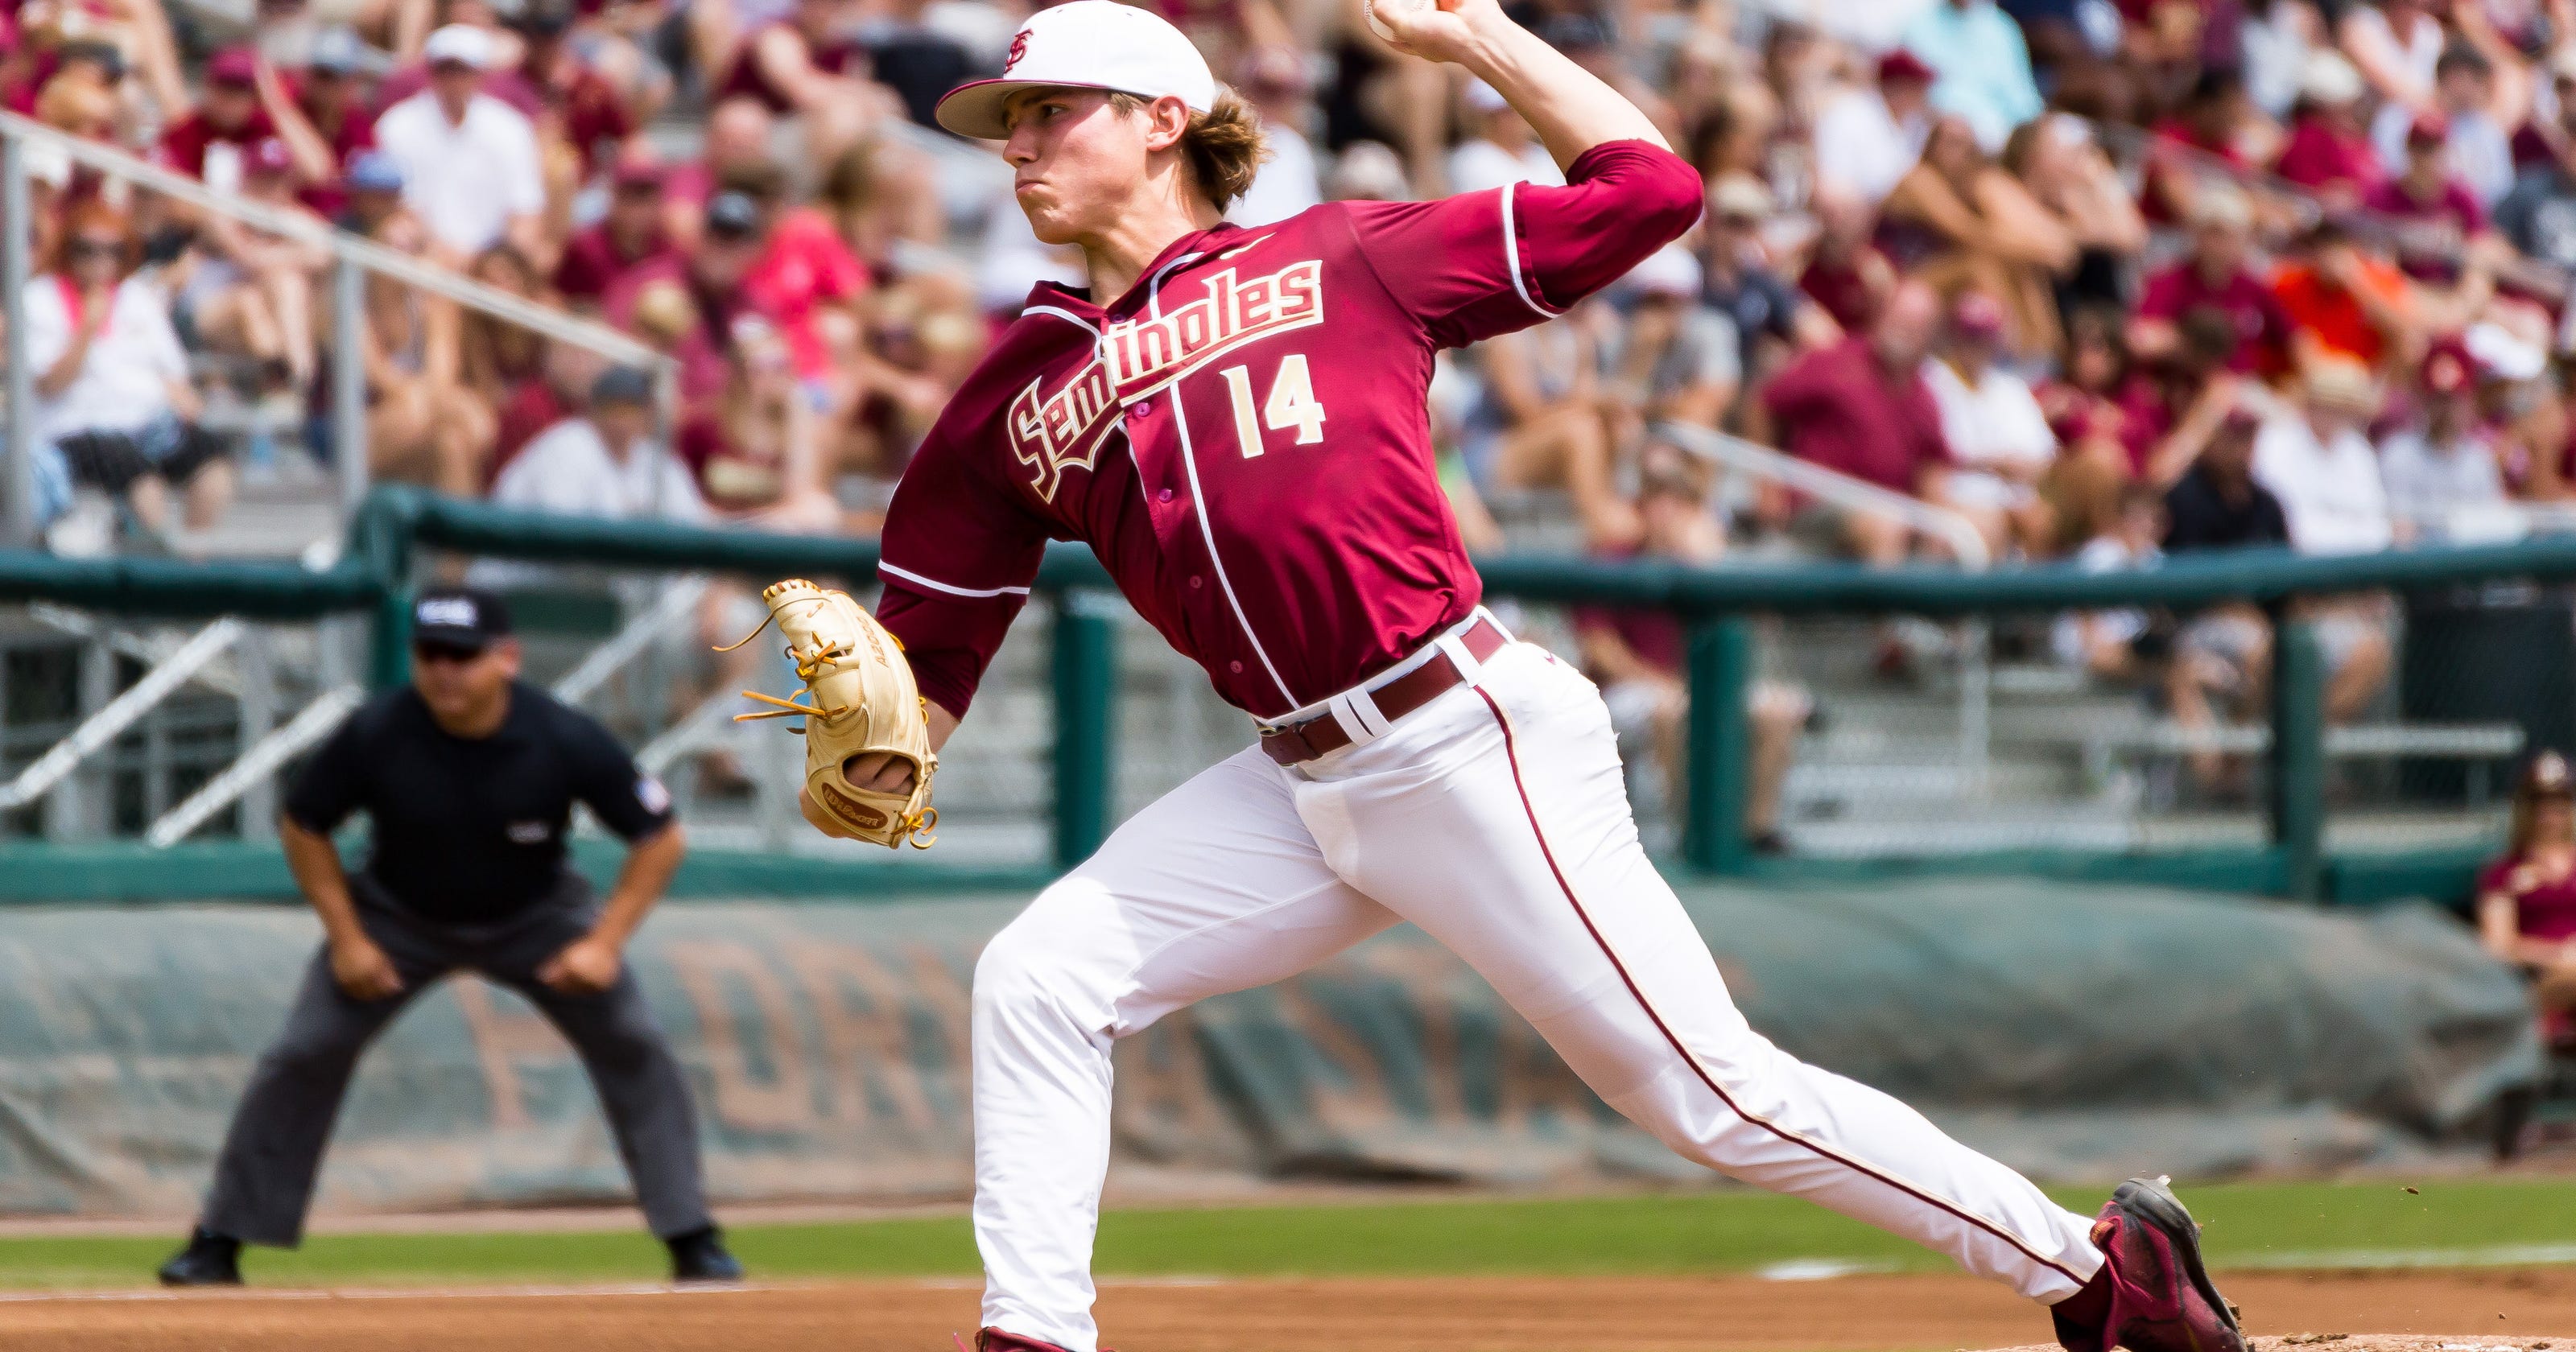 Florida State baseball geared up for new season